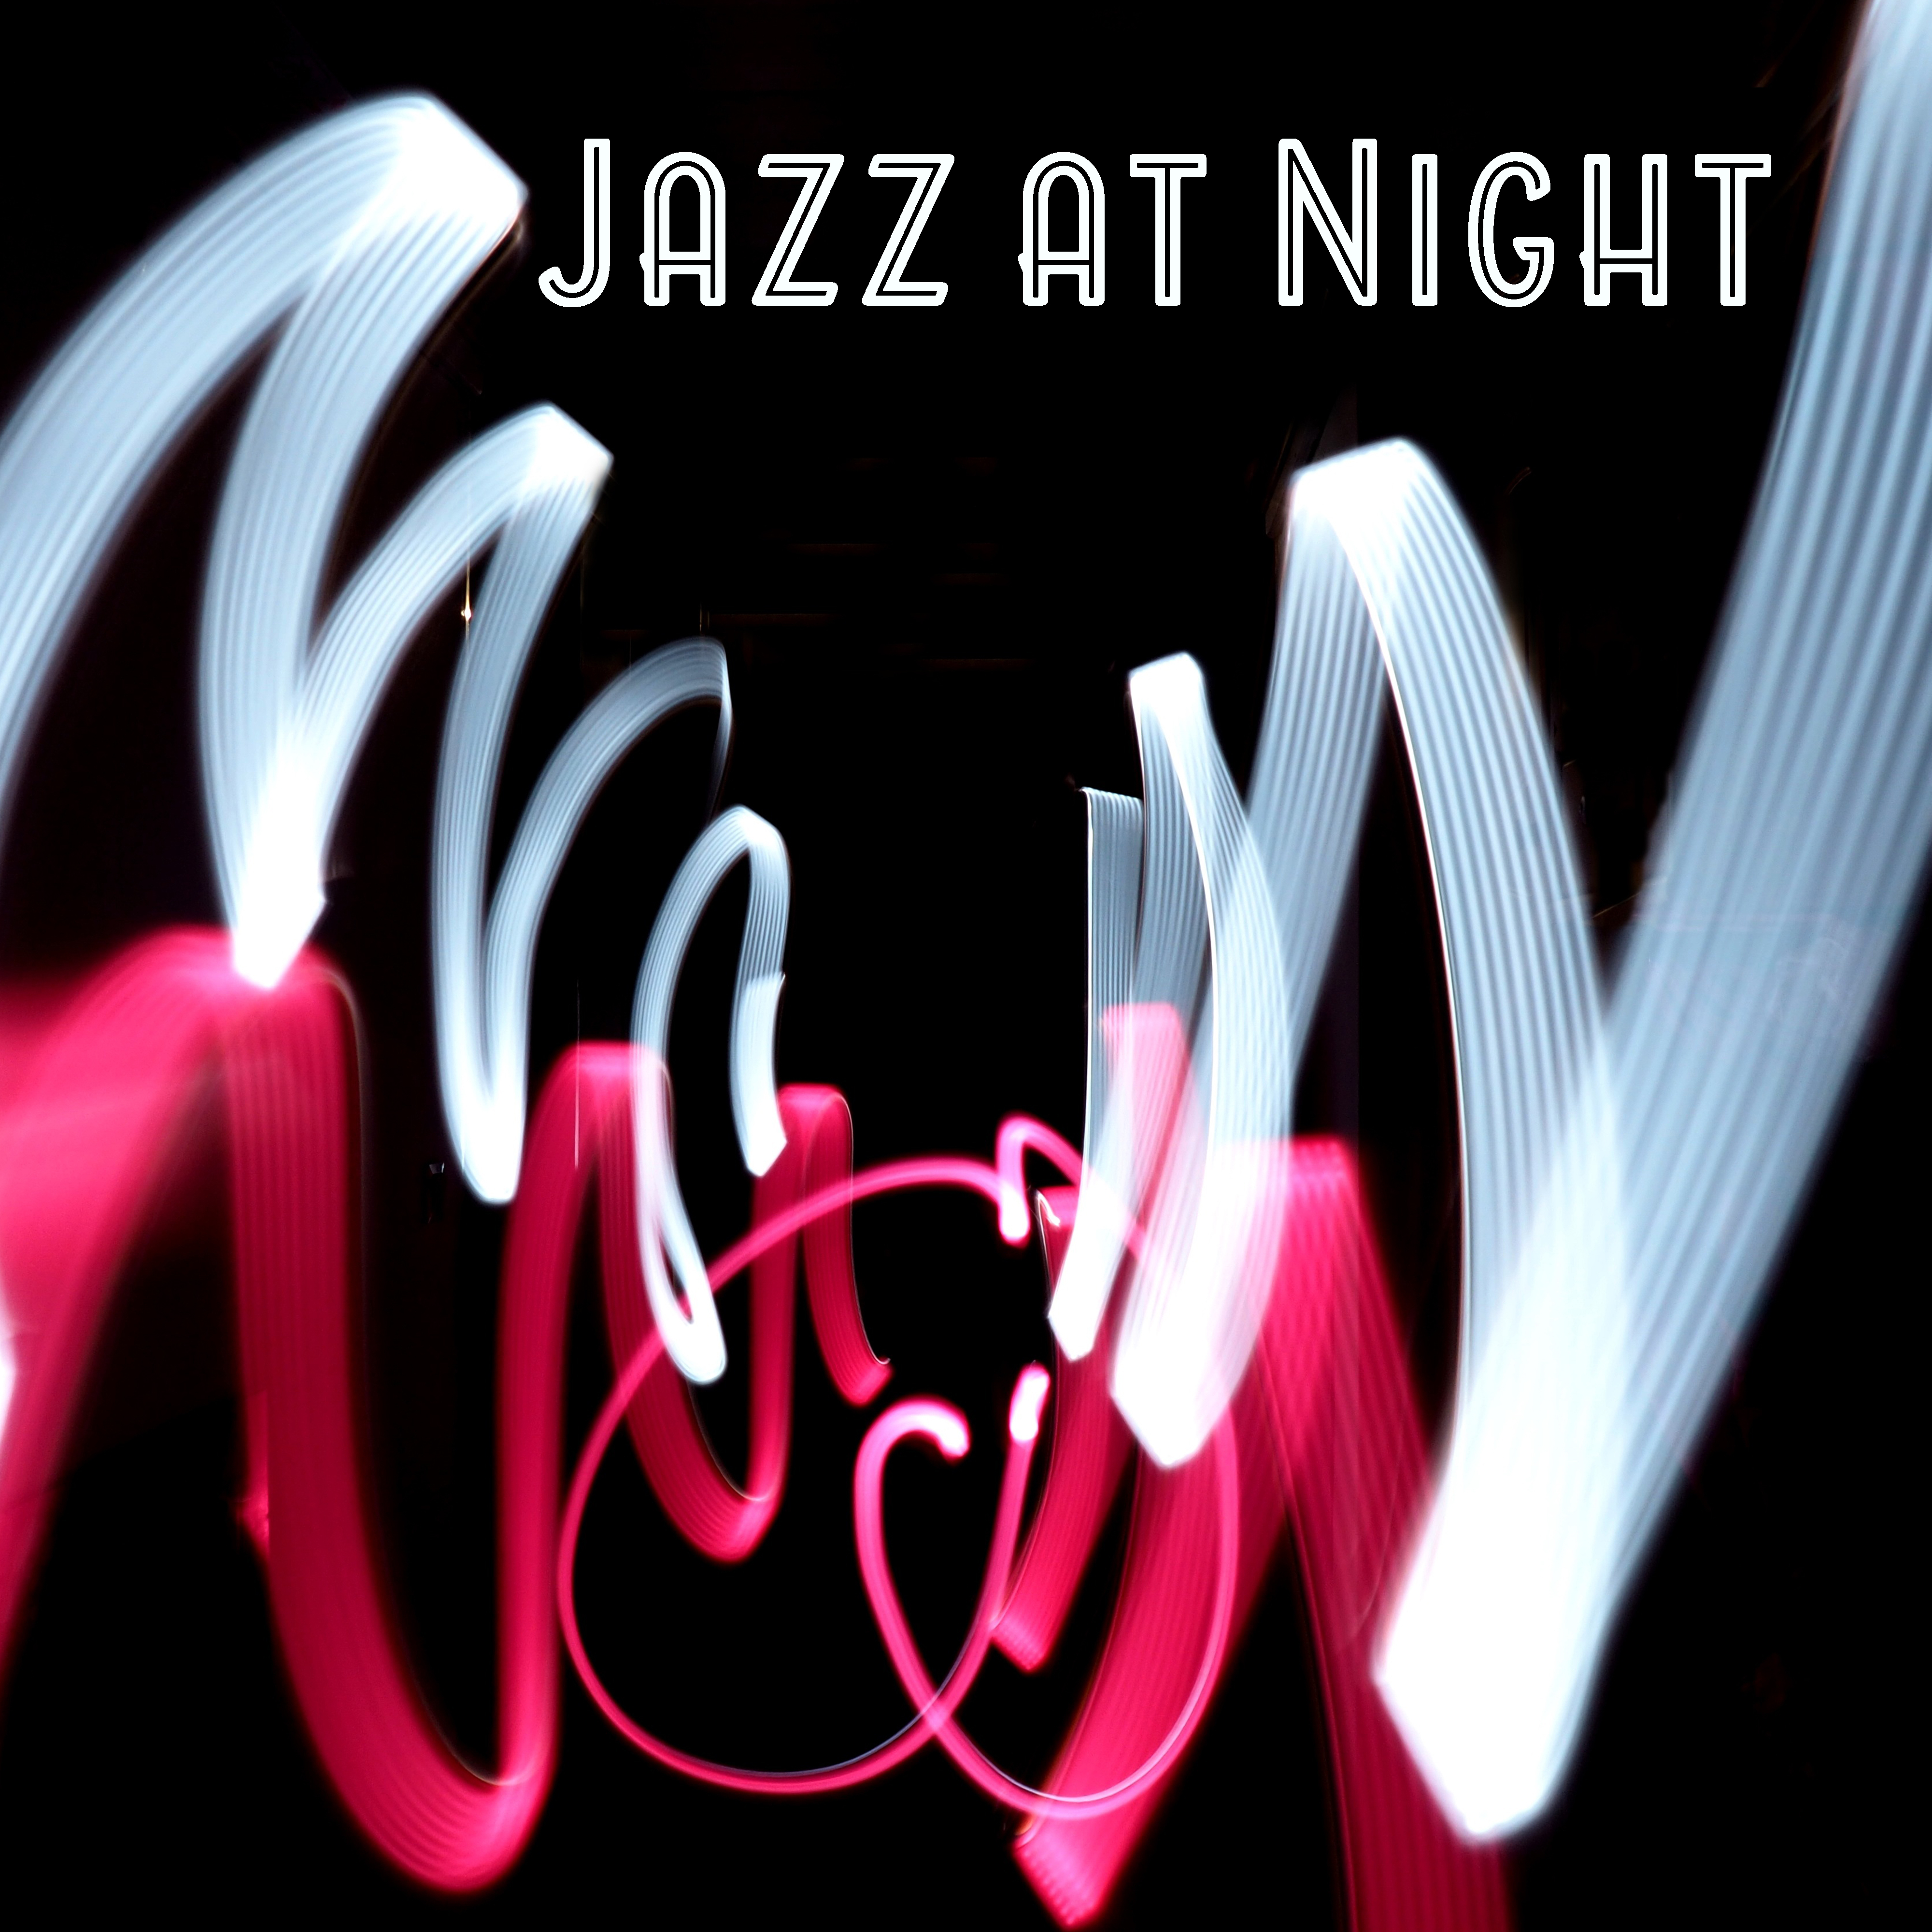 Jazz at Night  Smooth Sounds of Jazz, Easy Listening, Instrumental Jazz Music, Evening Relaxation, Stress Relief